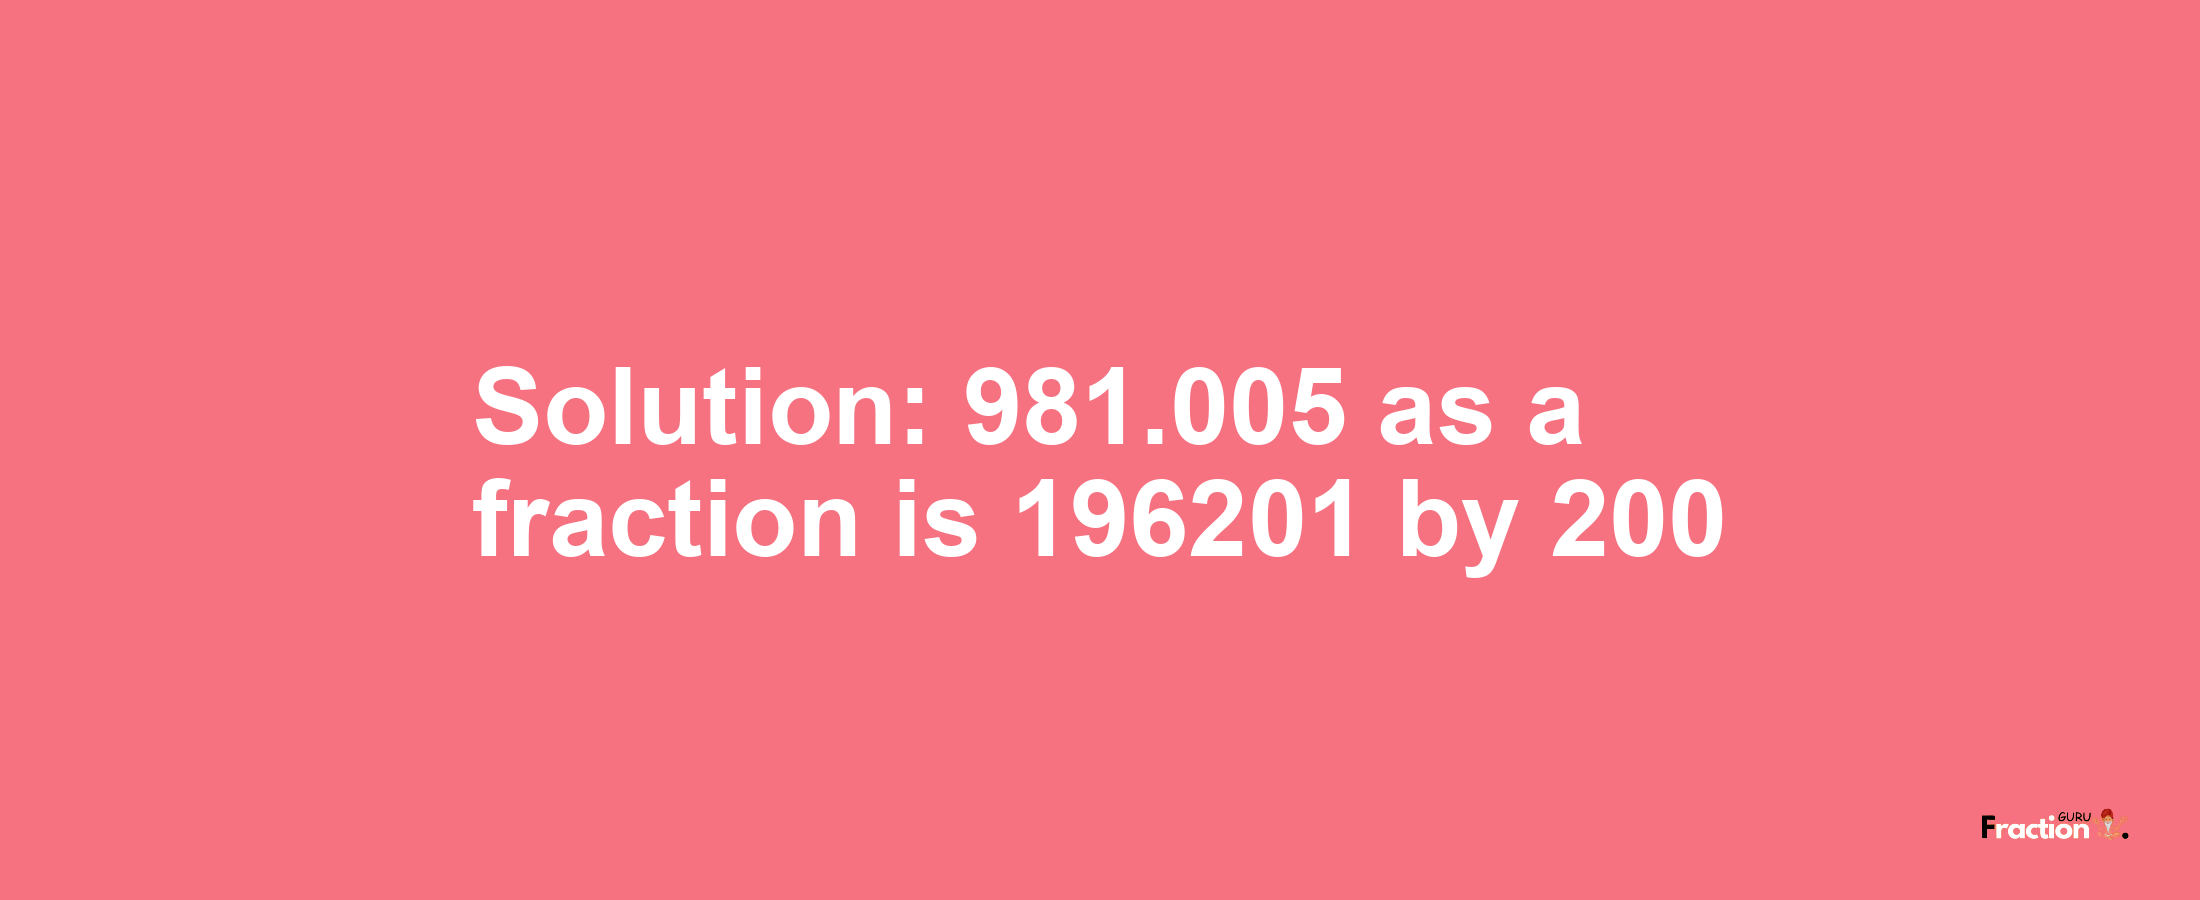 Solution:981.005 as a fraction is 196201/200